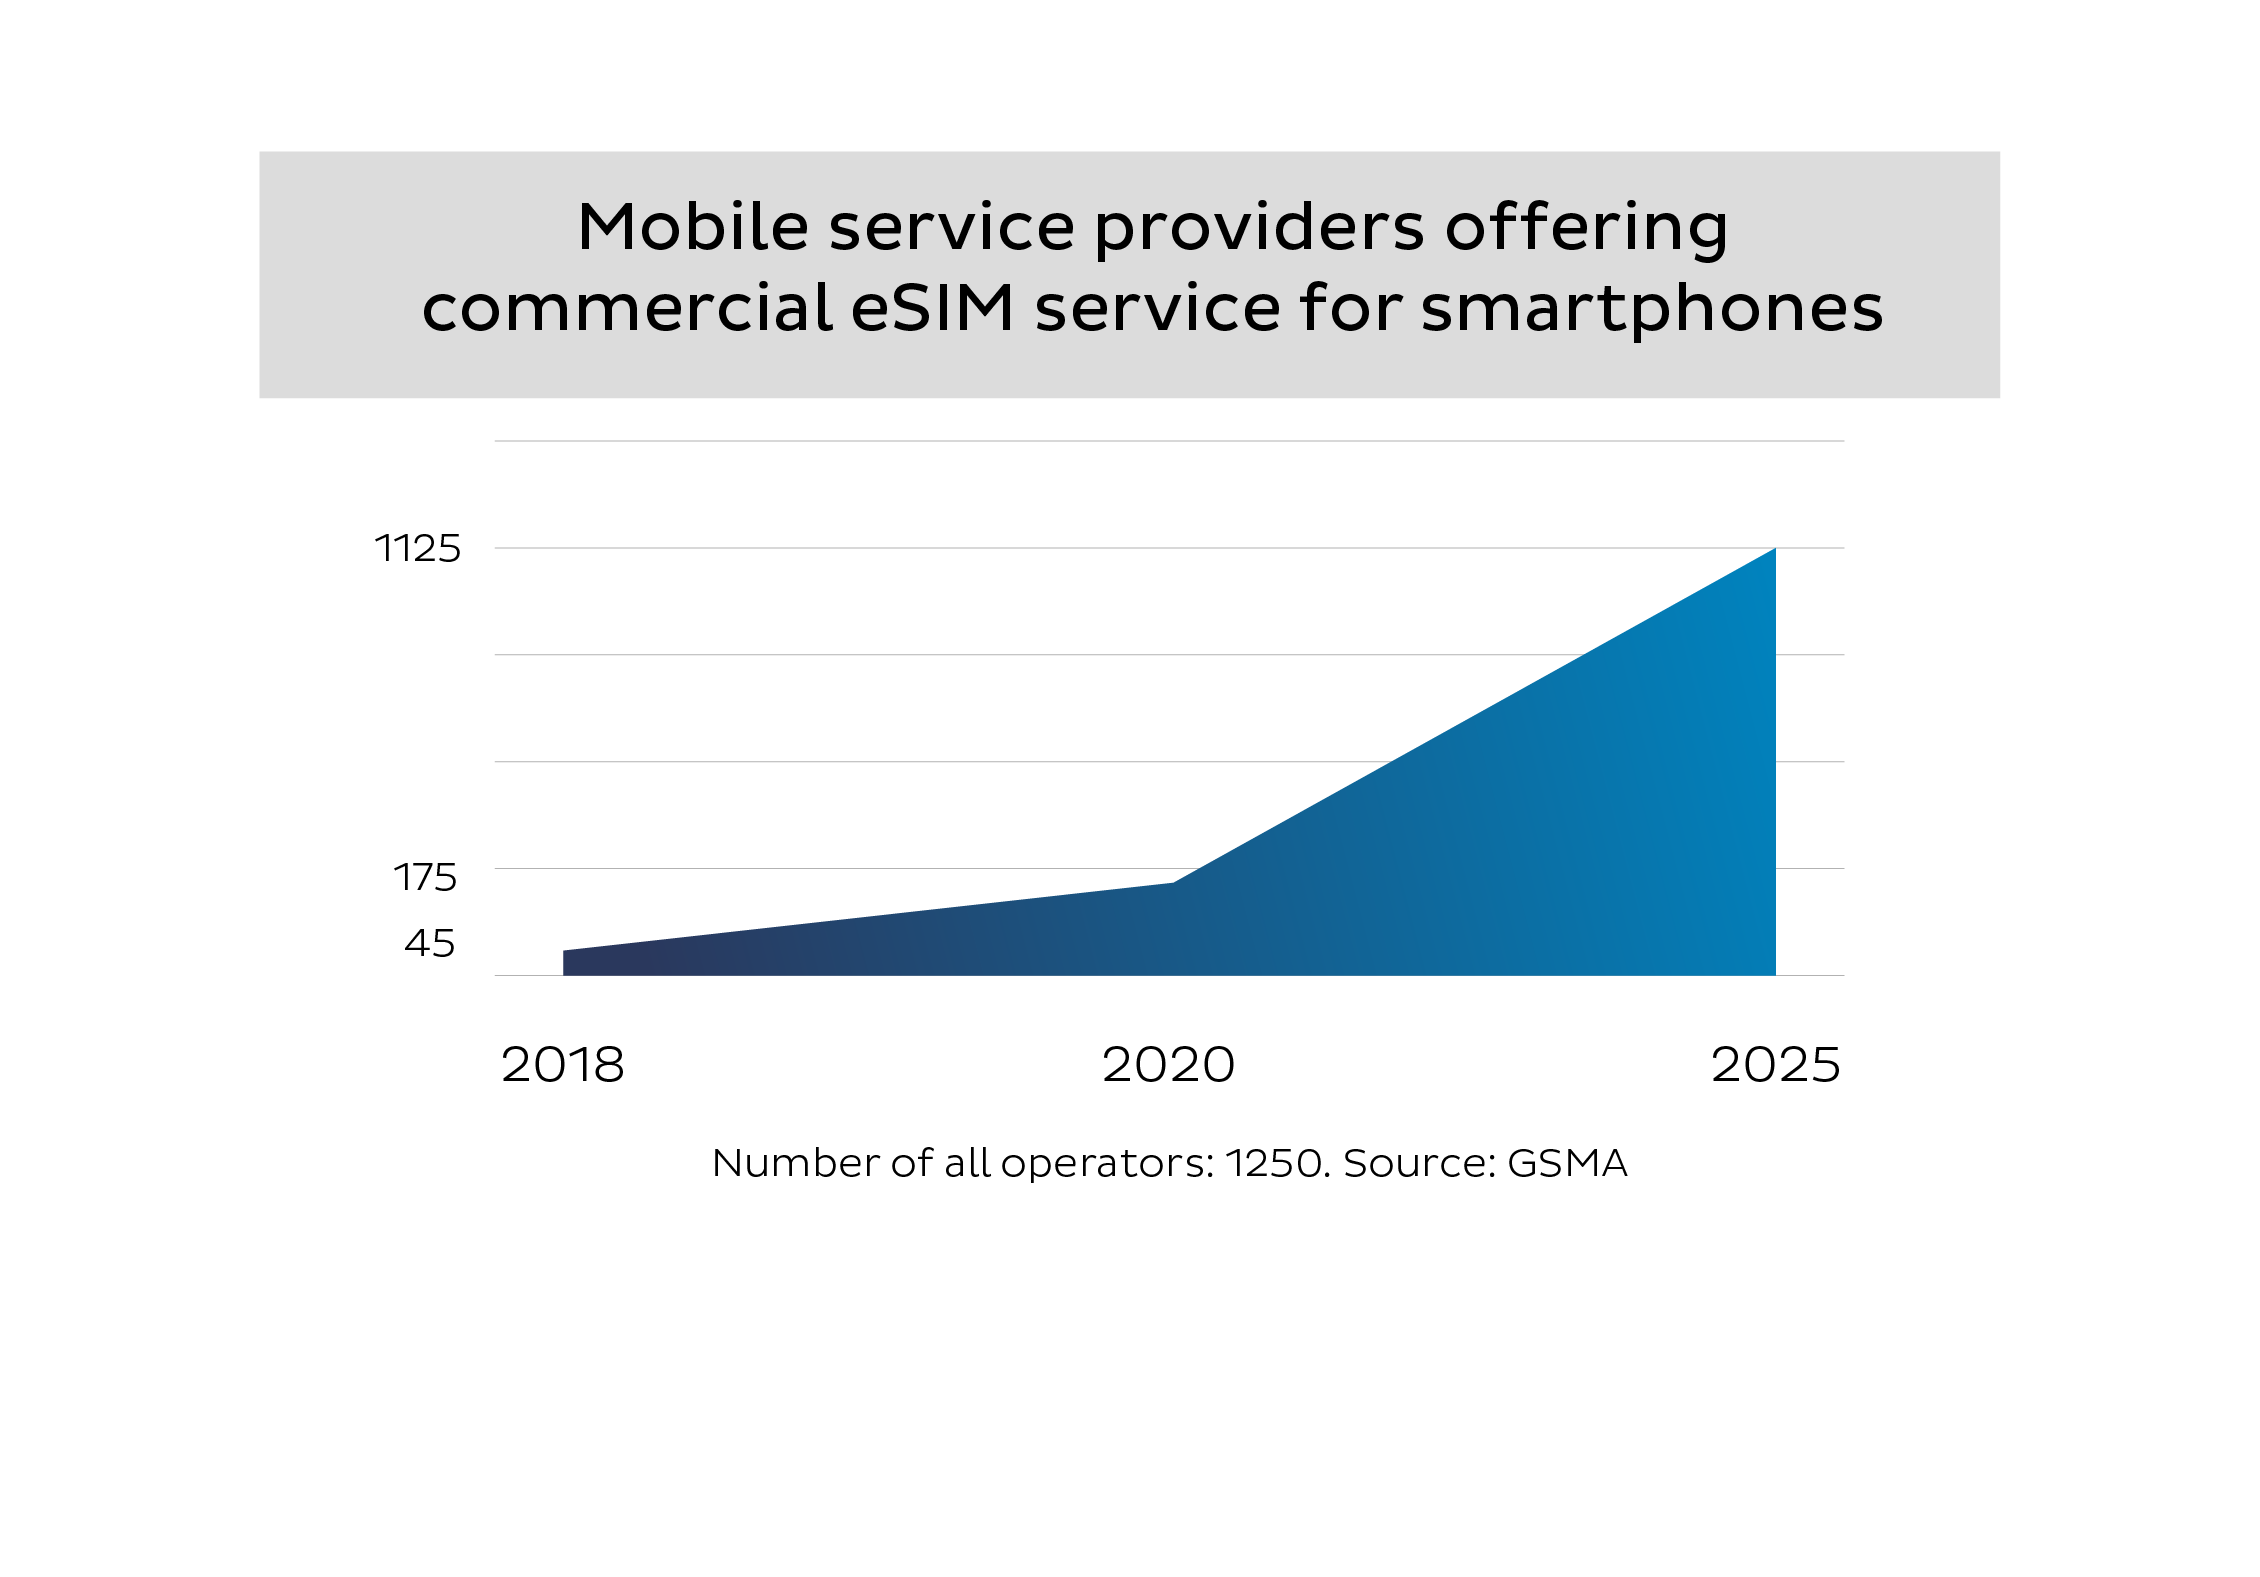 Mobile service providers offering commercial eSIM service for smatphones in 2018, 2020 and 2025